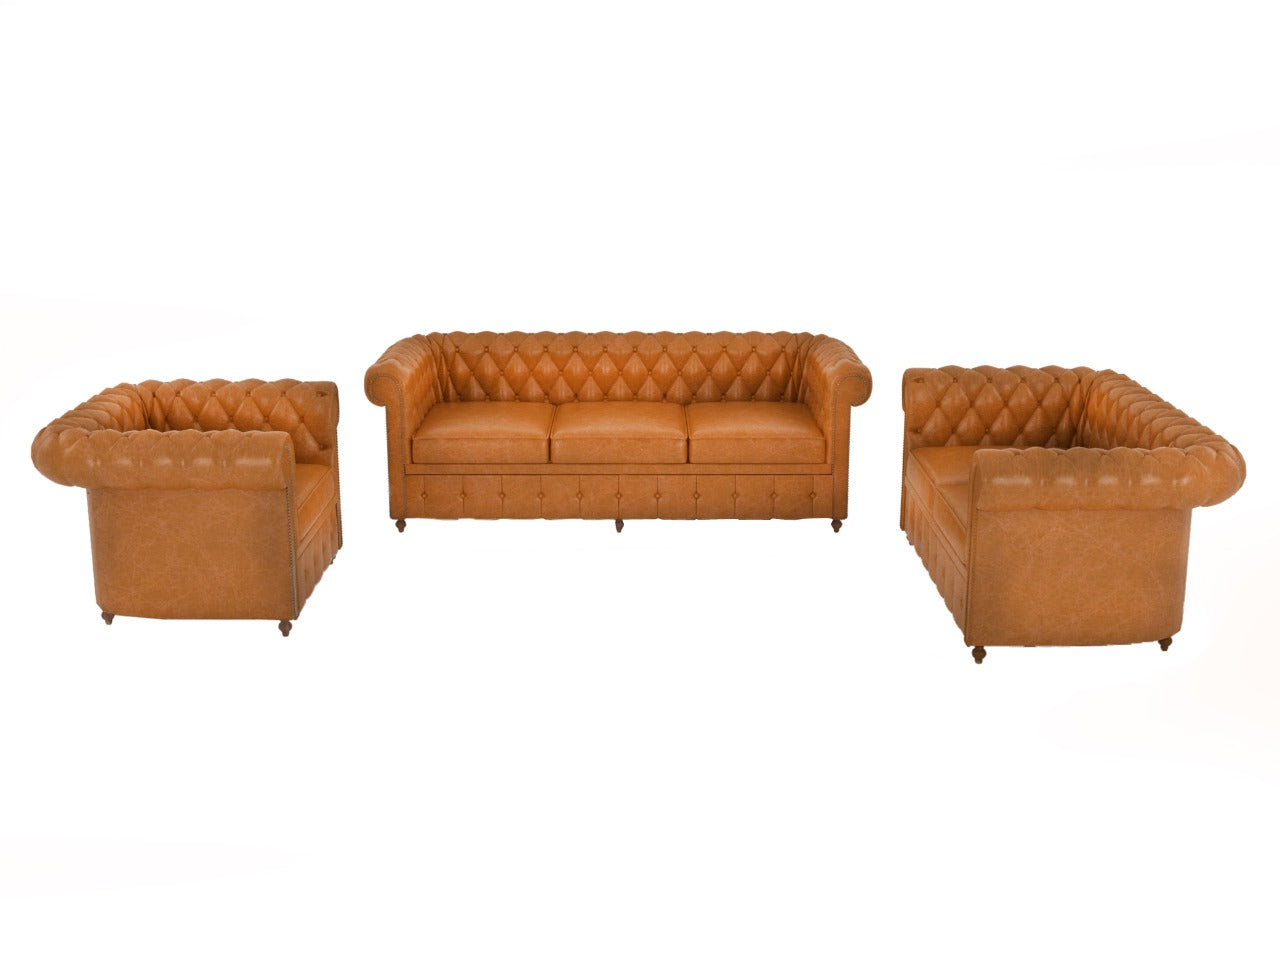 Alif 2 Seater Sofa - Light Brown Buffalo Leather - Tabeer Homes